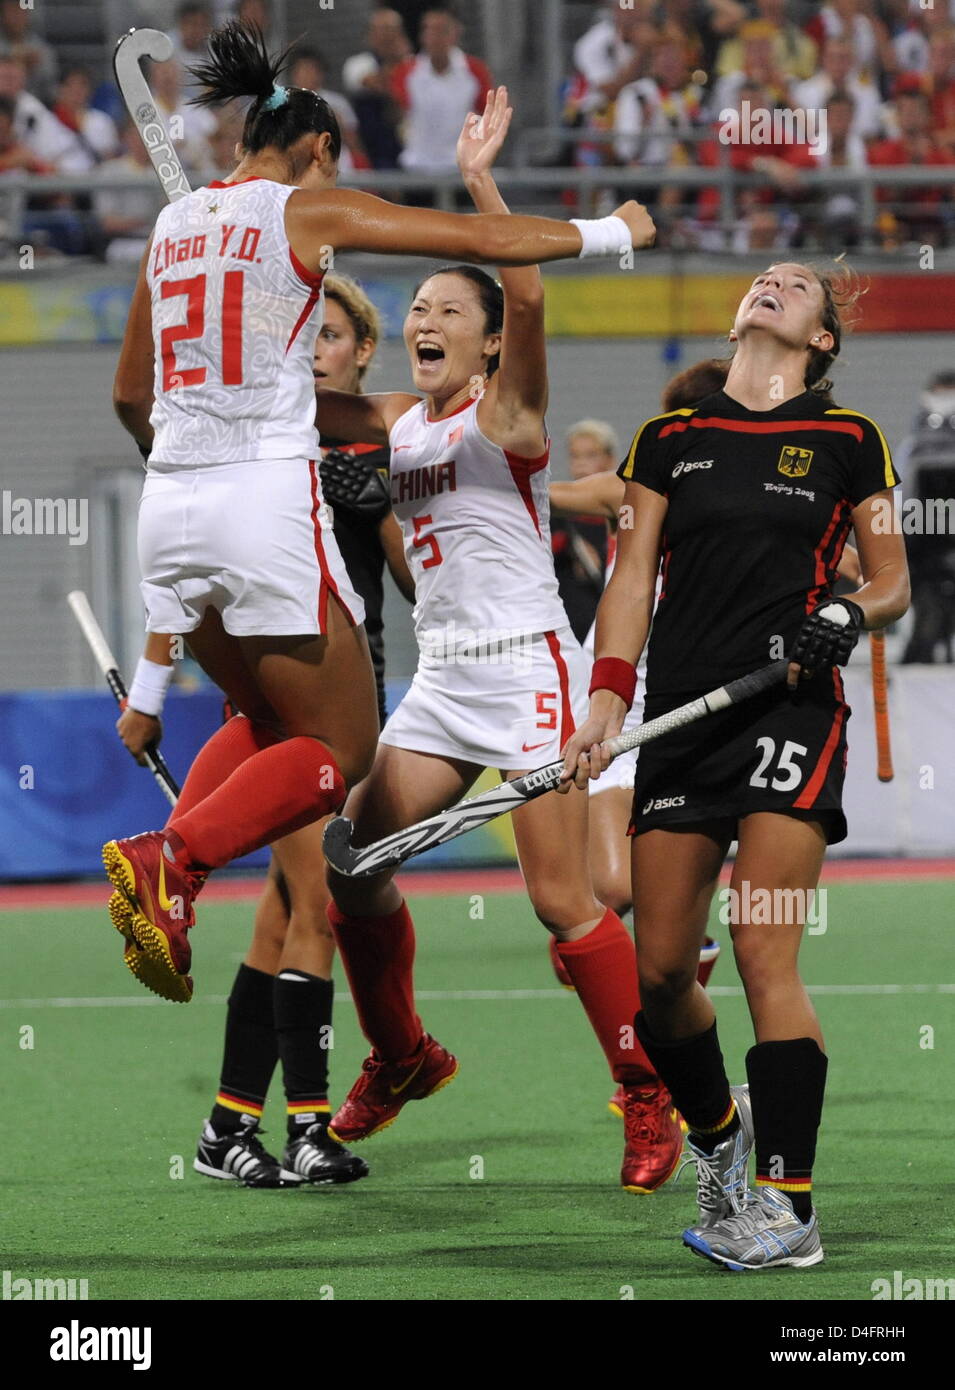 Janne Mueller-Wieland (R) from Germany looks dejected while Yudiao Zhao (C) from China is celebrated by teammate Hui Cheng after she has scored the 3:2 winning goal during the Semifinal match Germany against China in the womenÒs Field Hockey competition at the Beijing 2008 Olympic Games, Beijing, China, 20 August 2008. Photo: Peer Grimm dpa ###dpa### Stock Photo